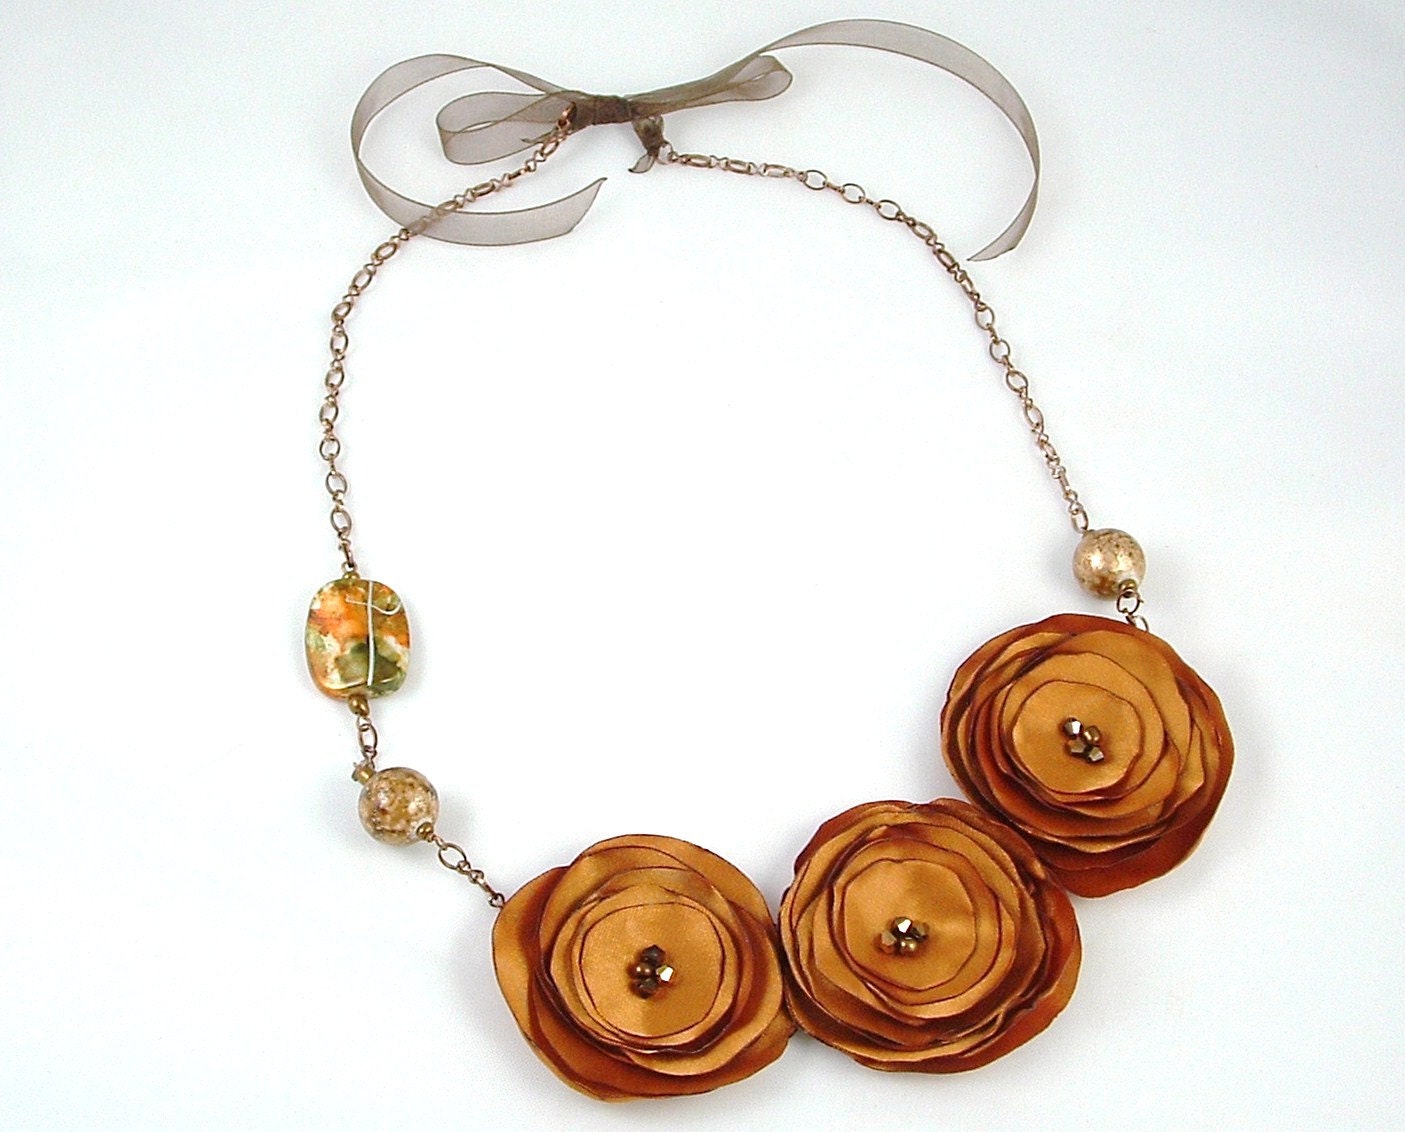 Granite Dark Gold Flower Fabric Necklace with glass beads and copper metal chain - GoodLuckWishes4U